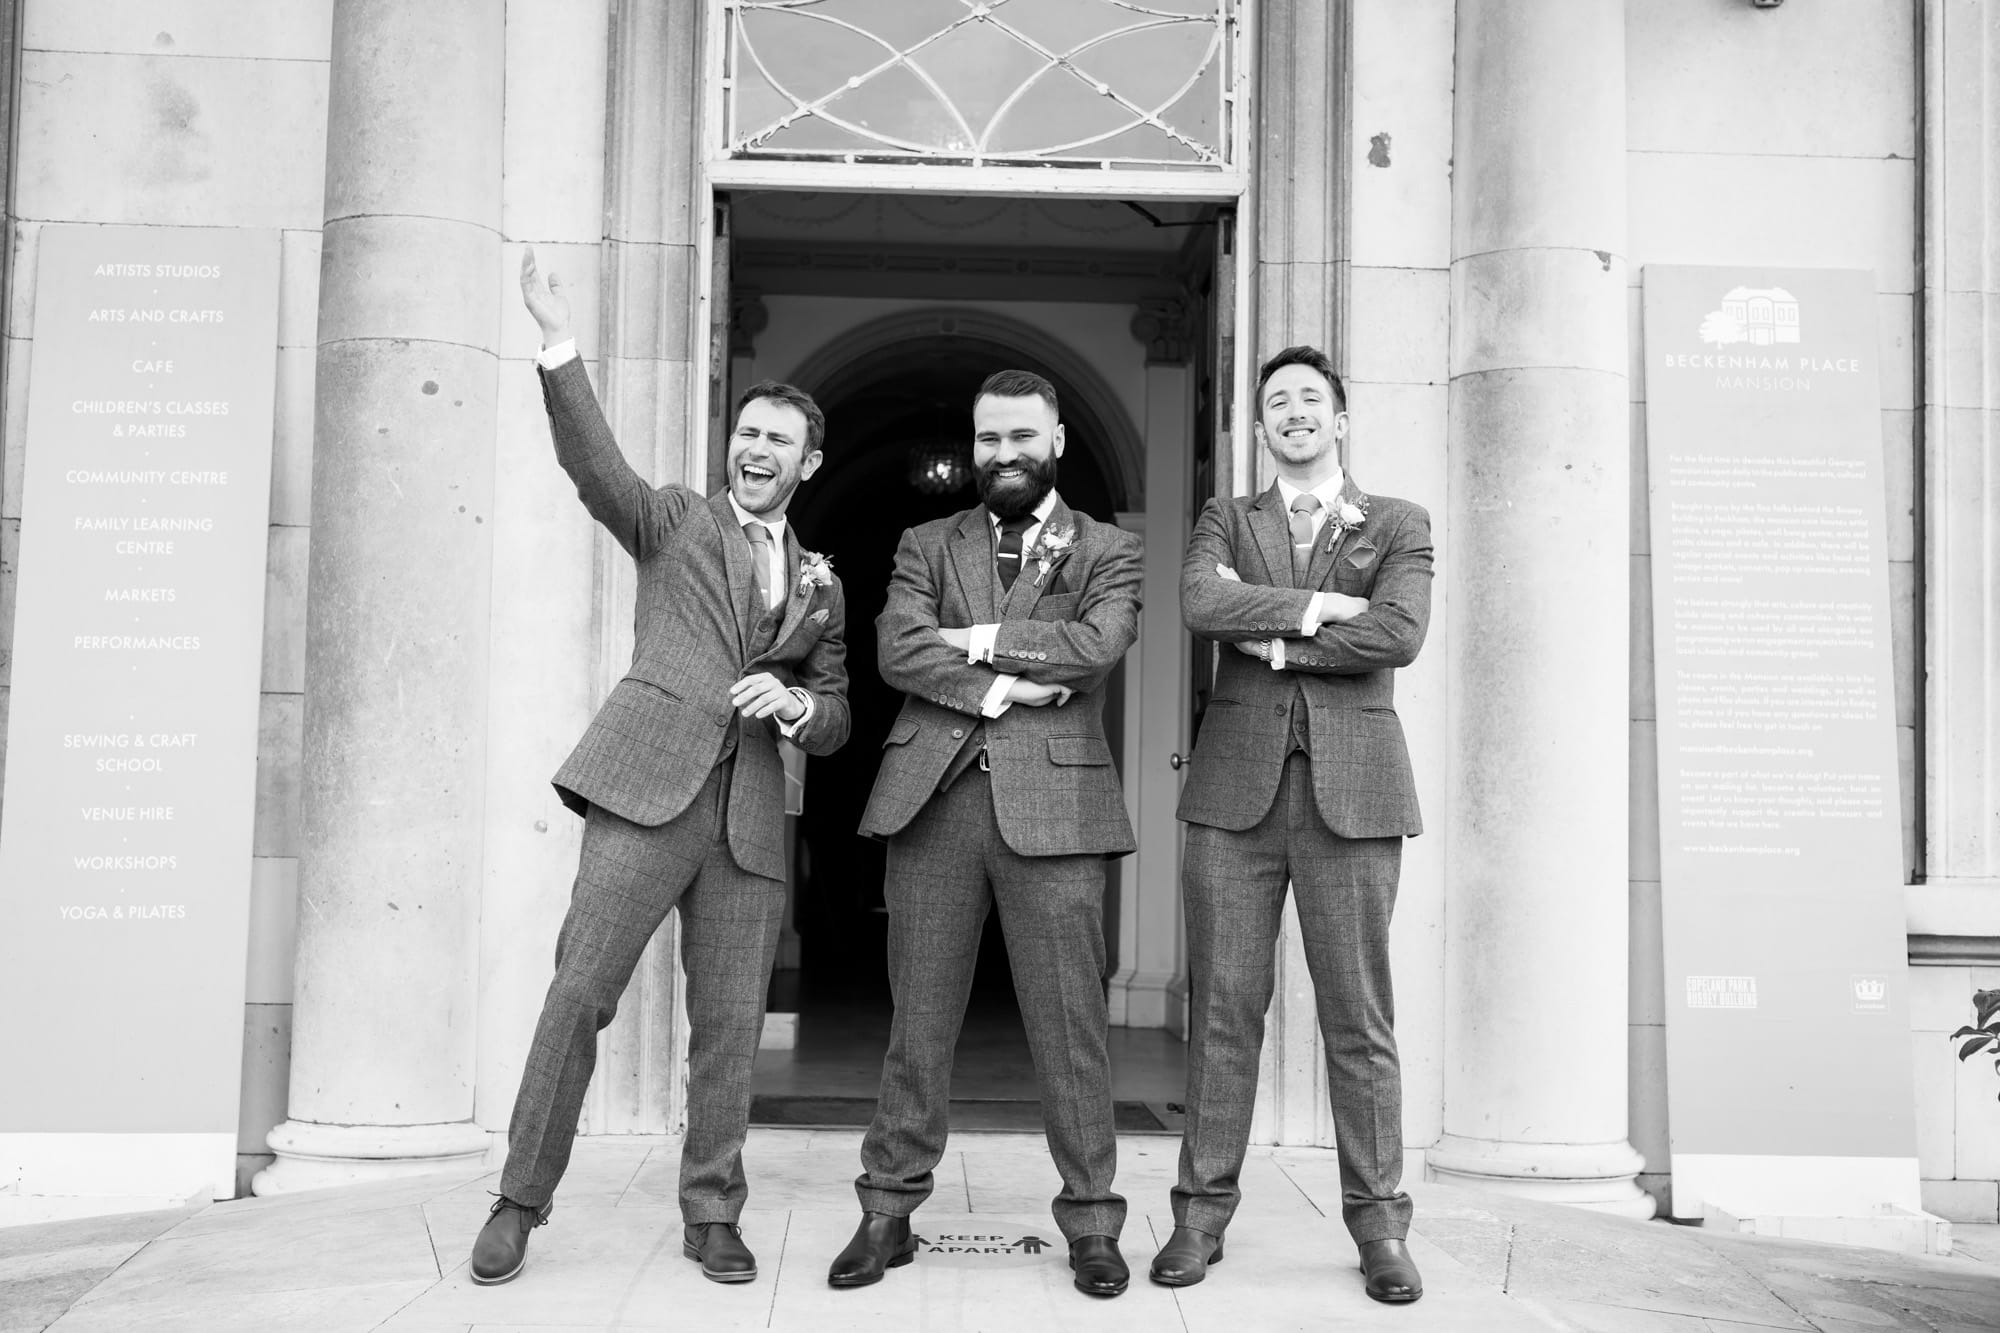 Groom and groomsmen before wedding in black and white Bromley wedding photography image outside Beckenham Place Mansion